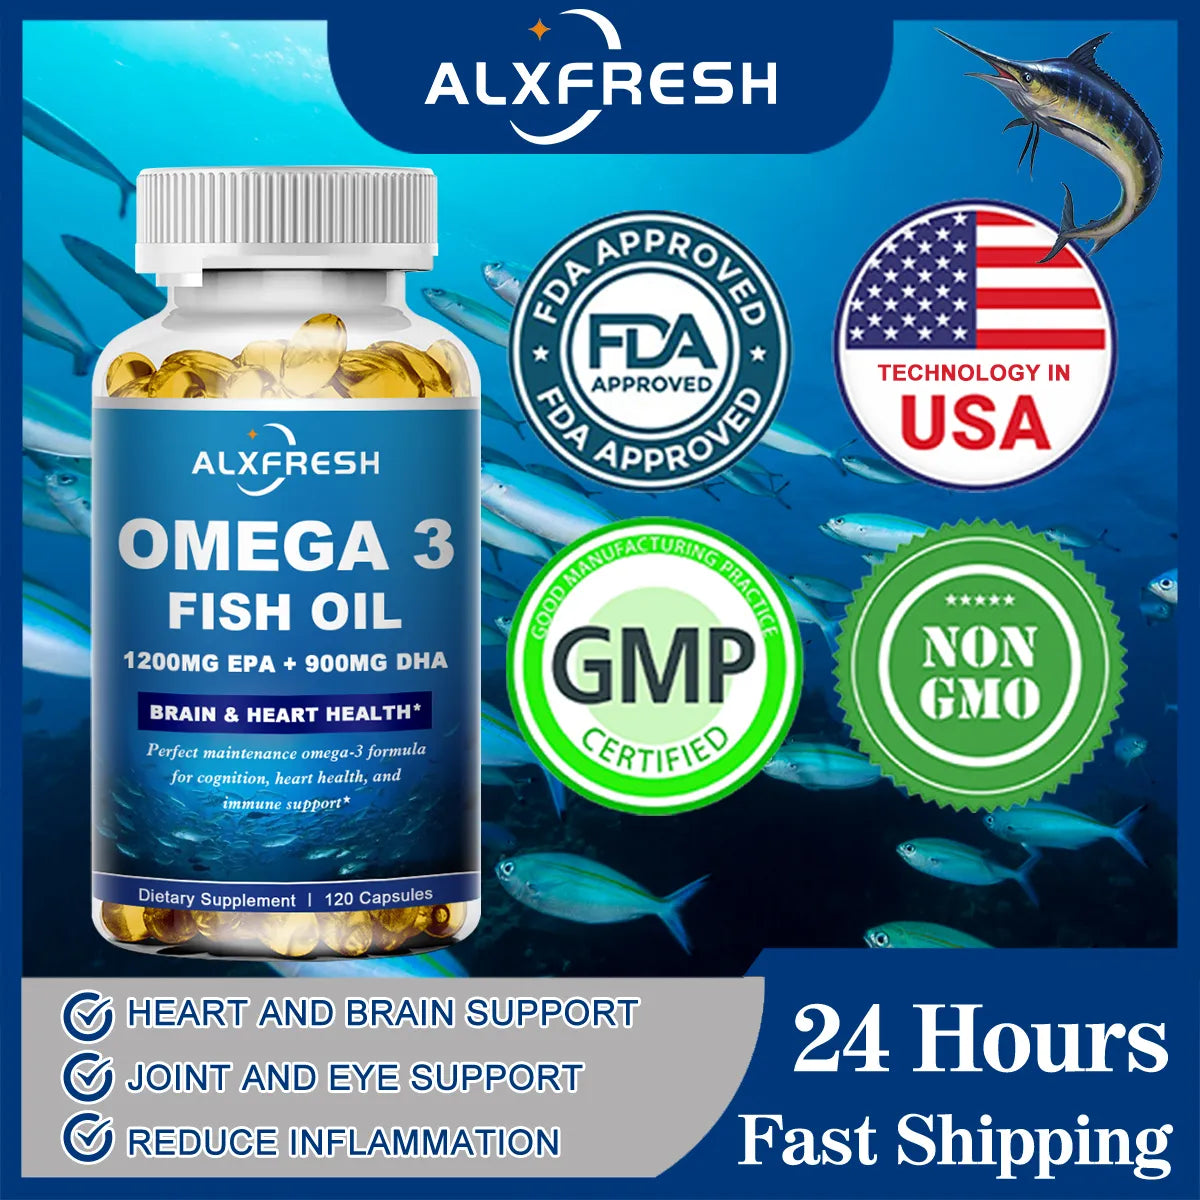 Omega-3 Fish Oil Capsules Dietary Supplement for Brain and Heart Health including EPA and DHA